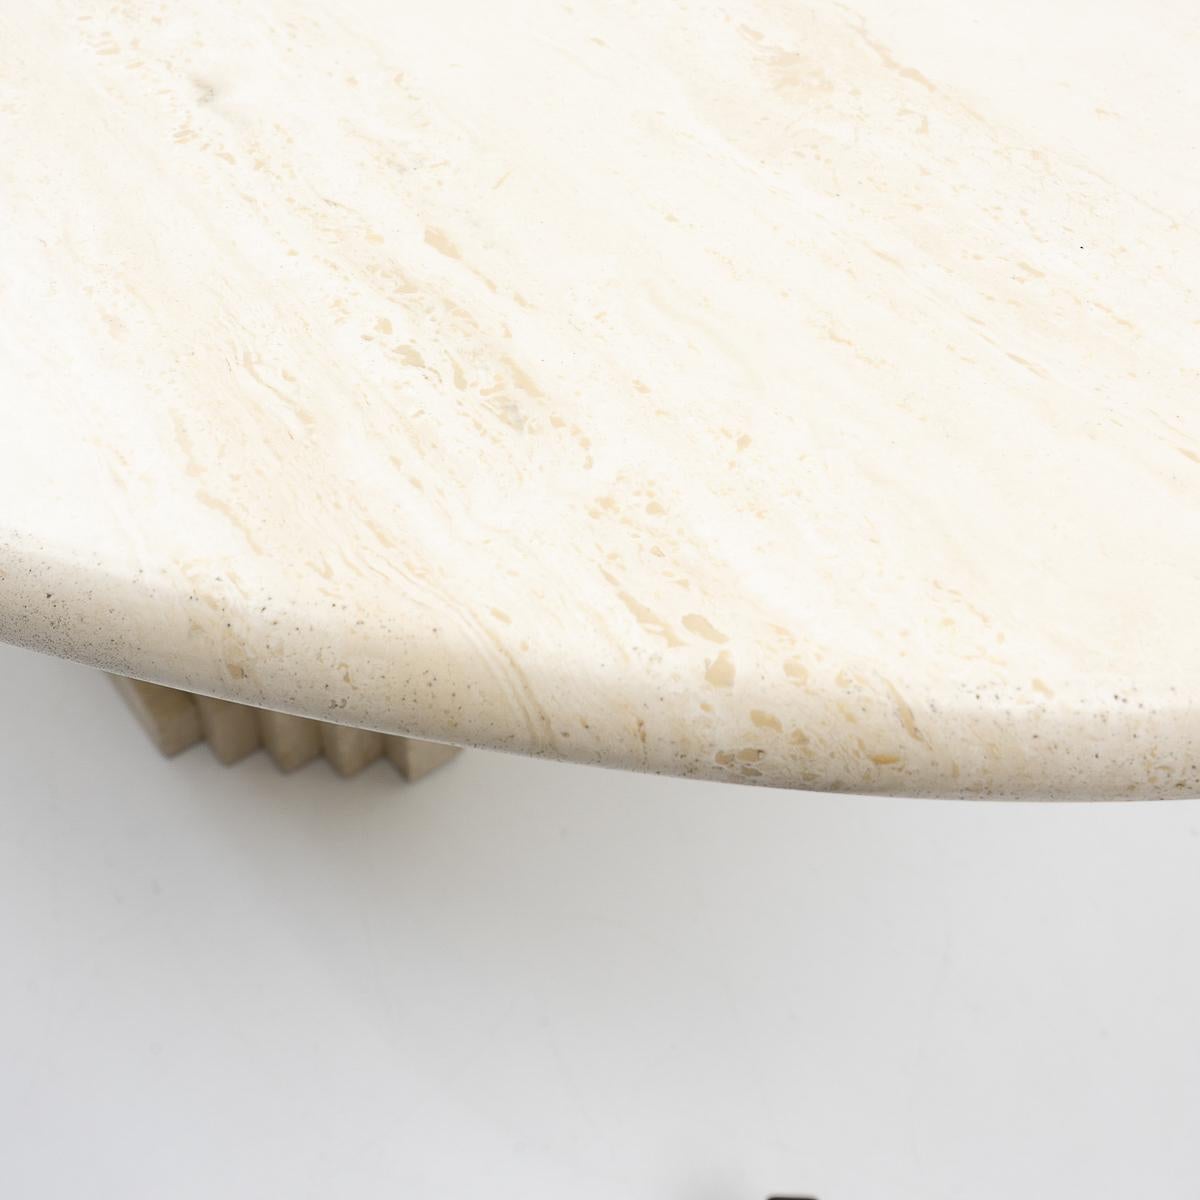 Sculptural Carlo Scarpa Travertine Dining Table, by Cattelan Italia, 1970s For Sale 2